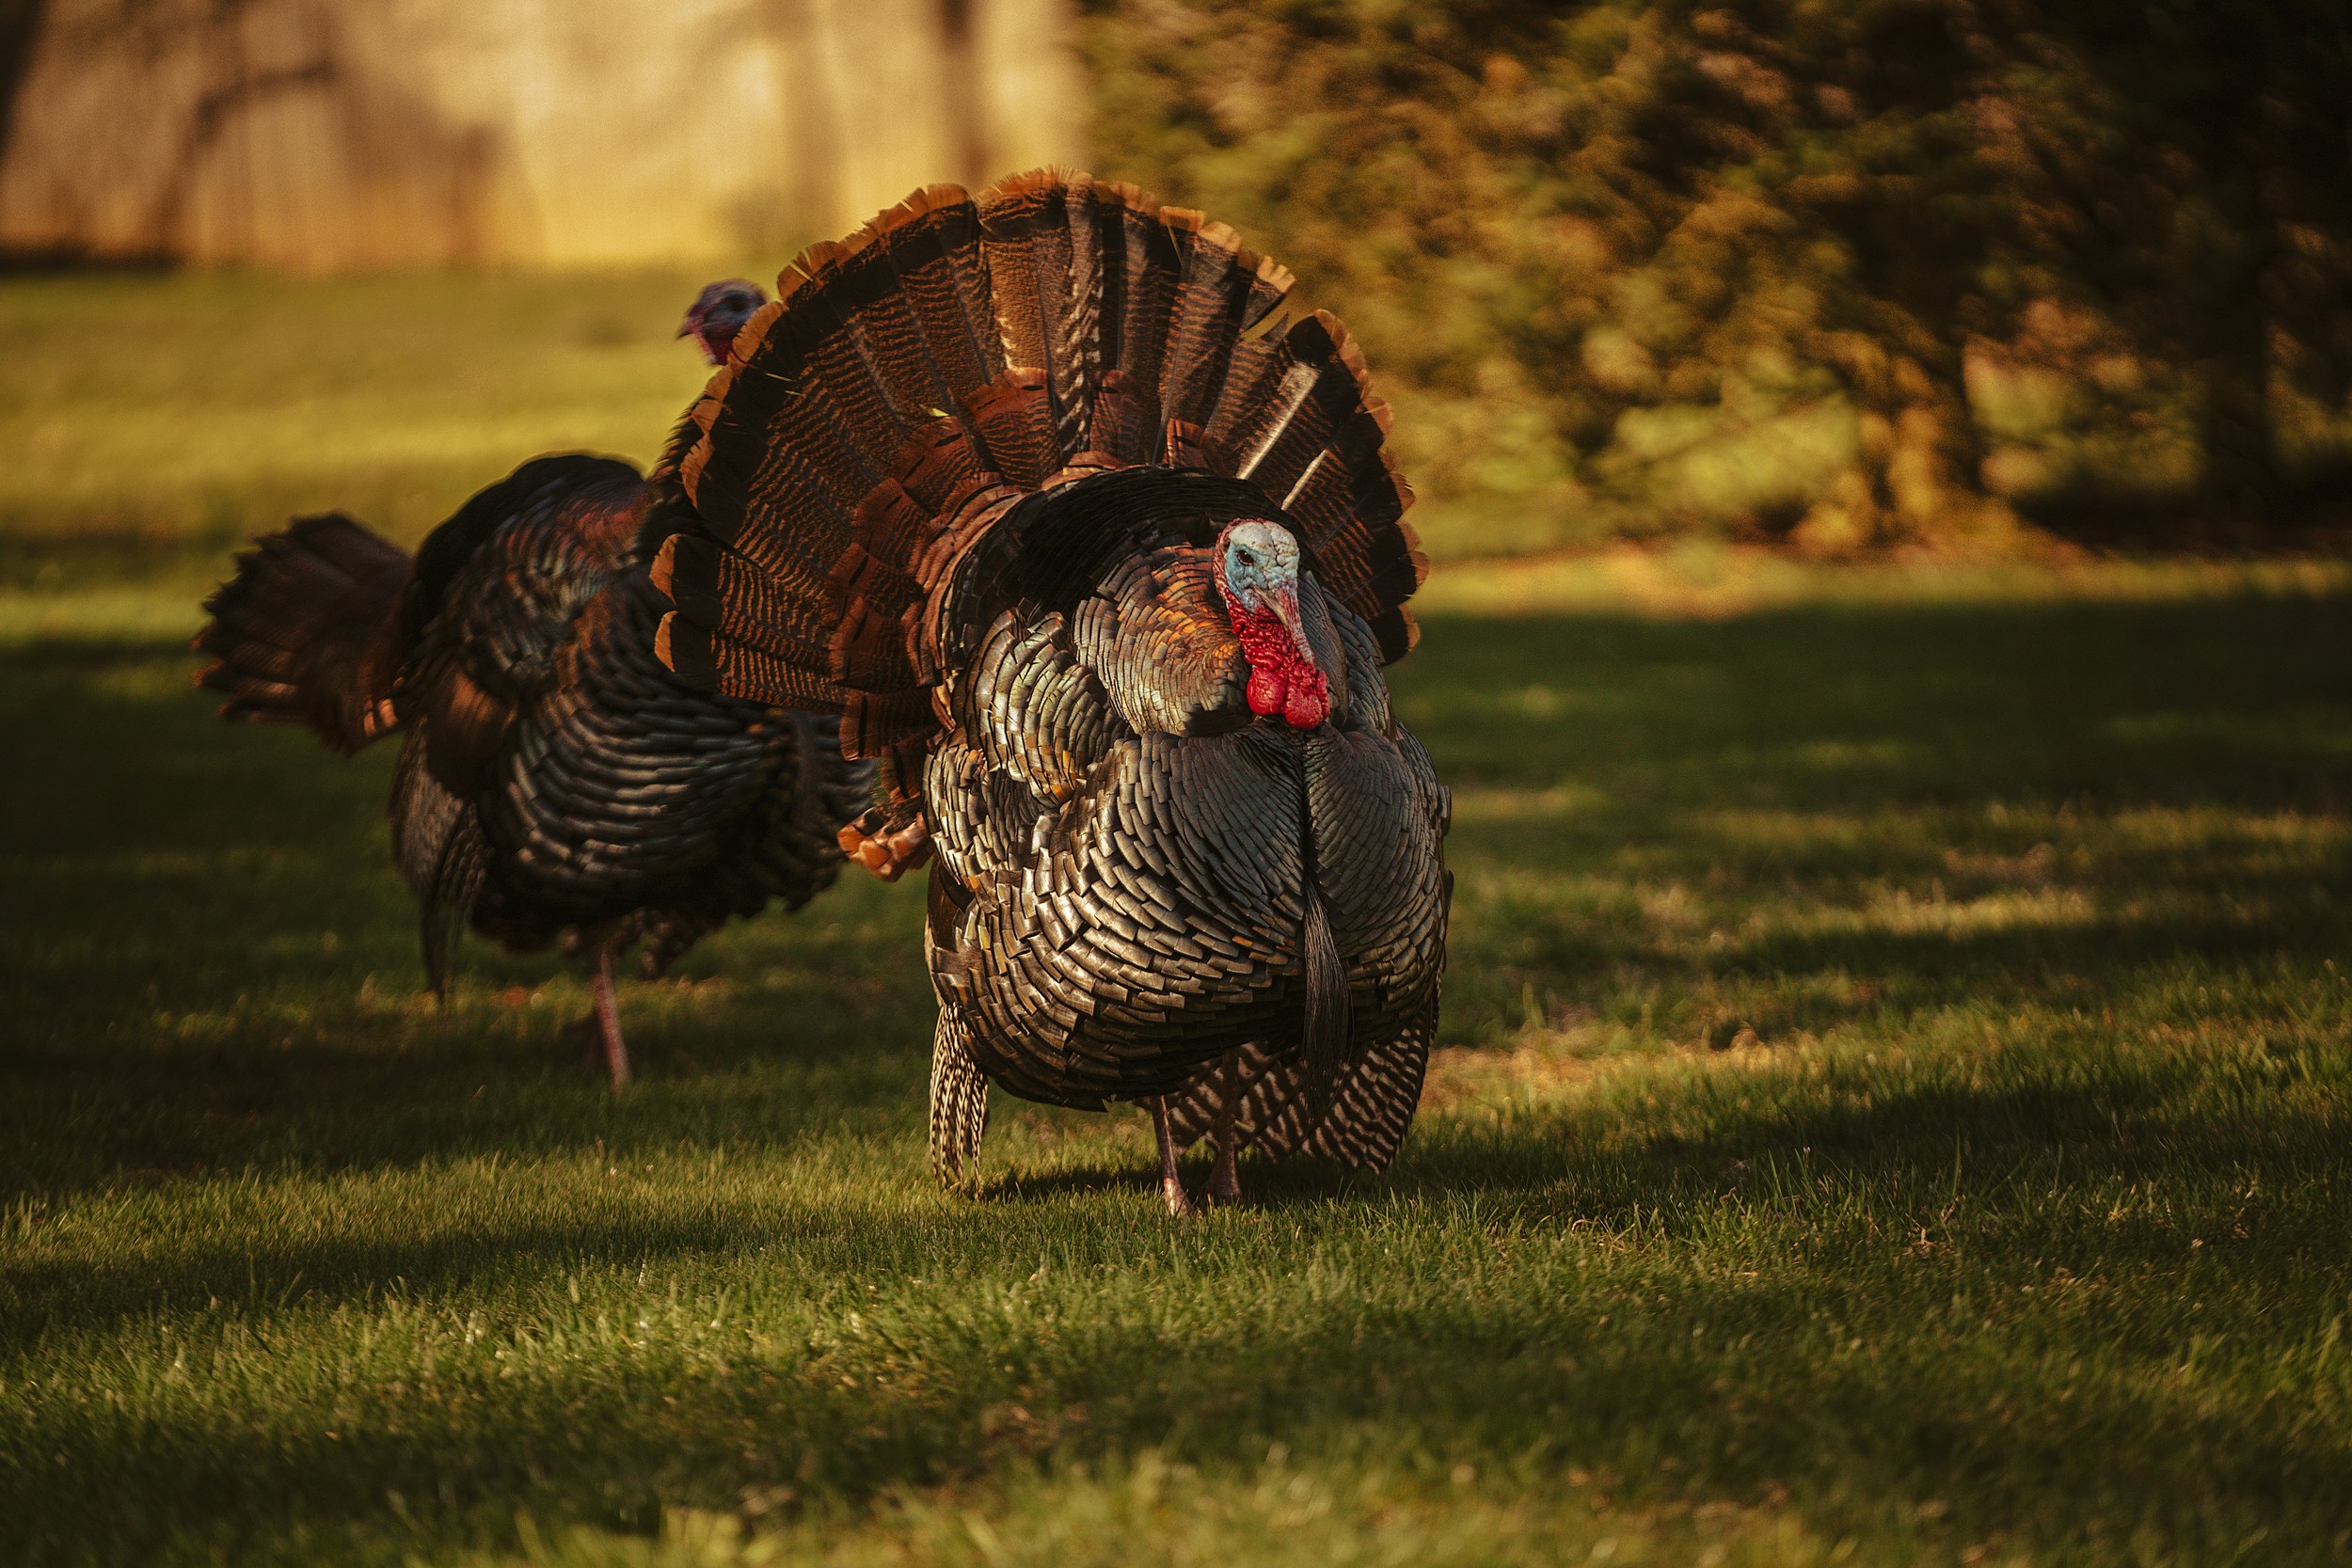 The Turkey Reel is a must have call for Turkey hunting!